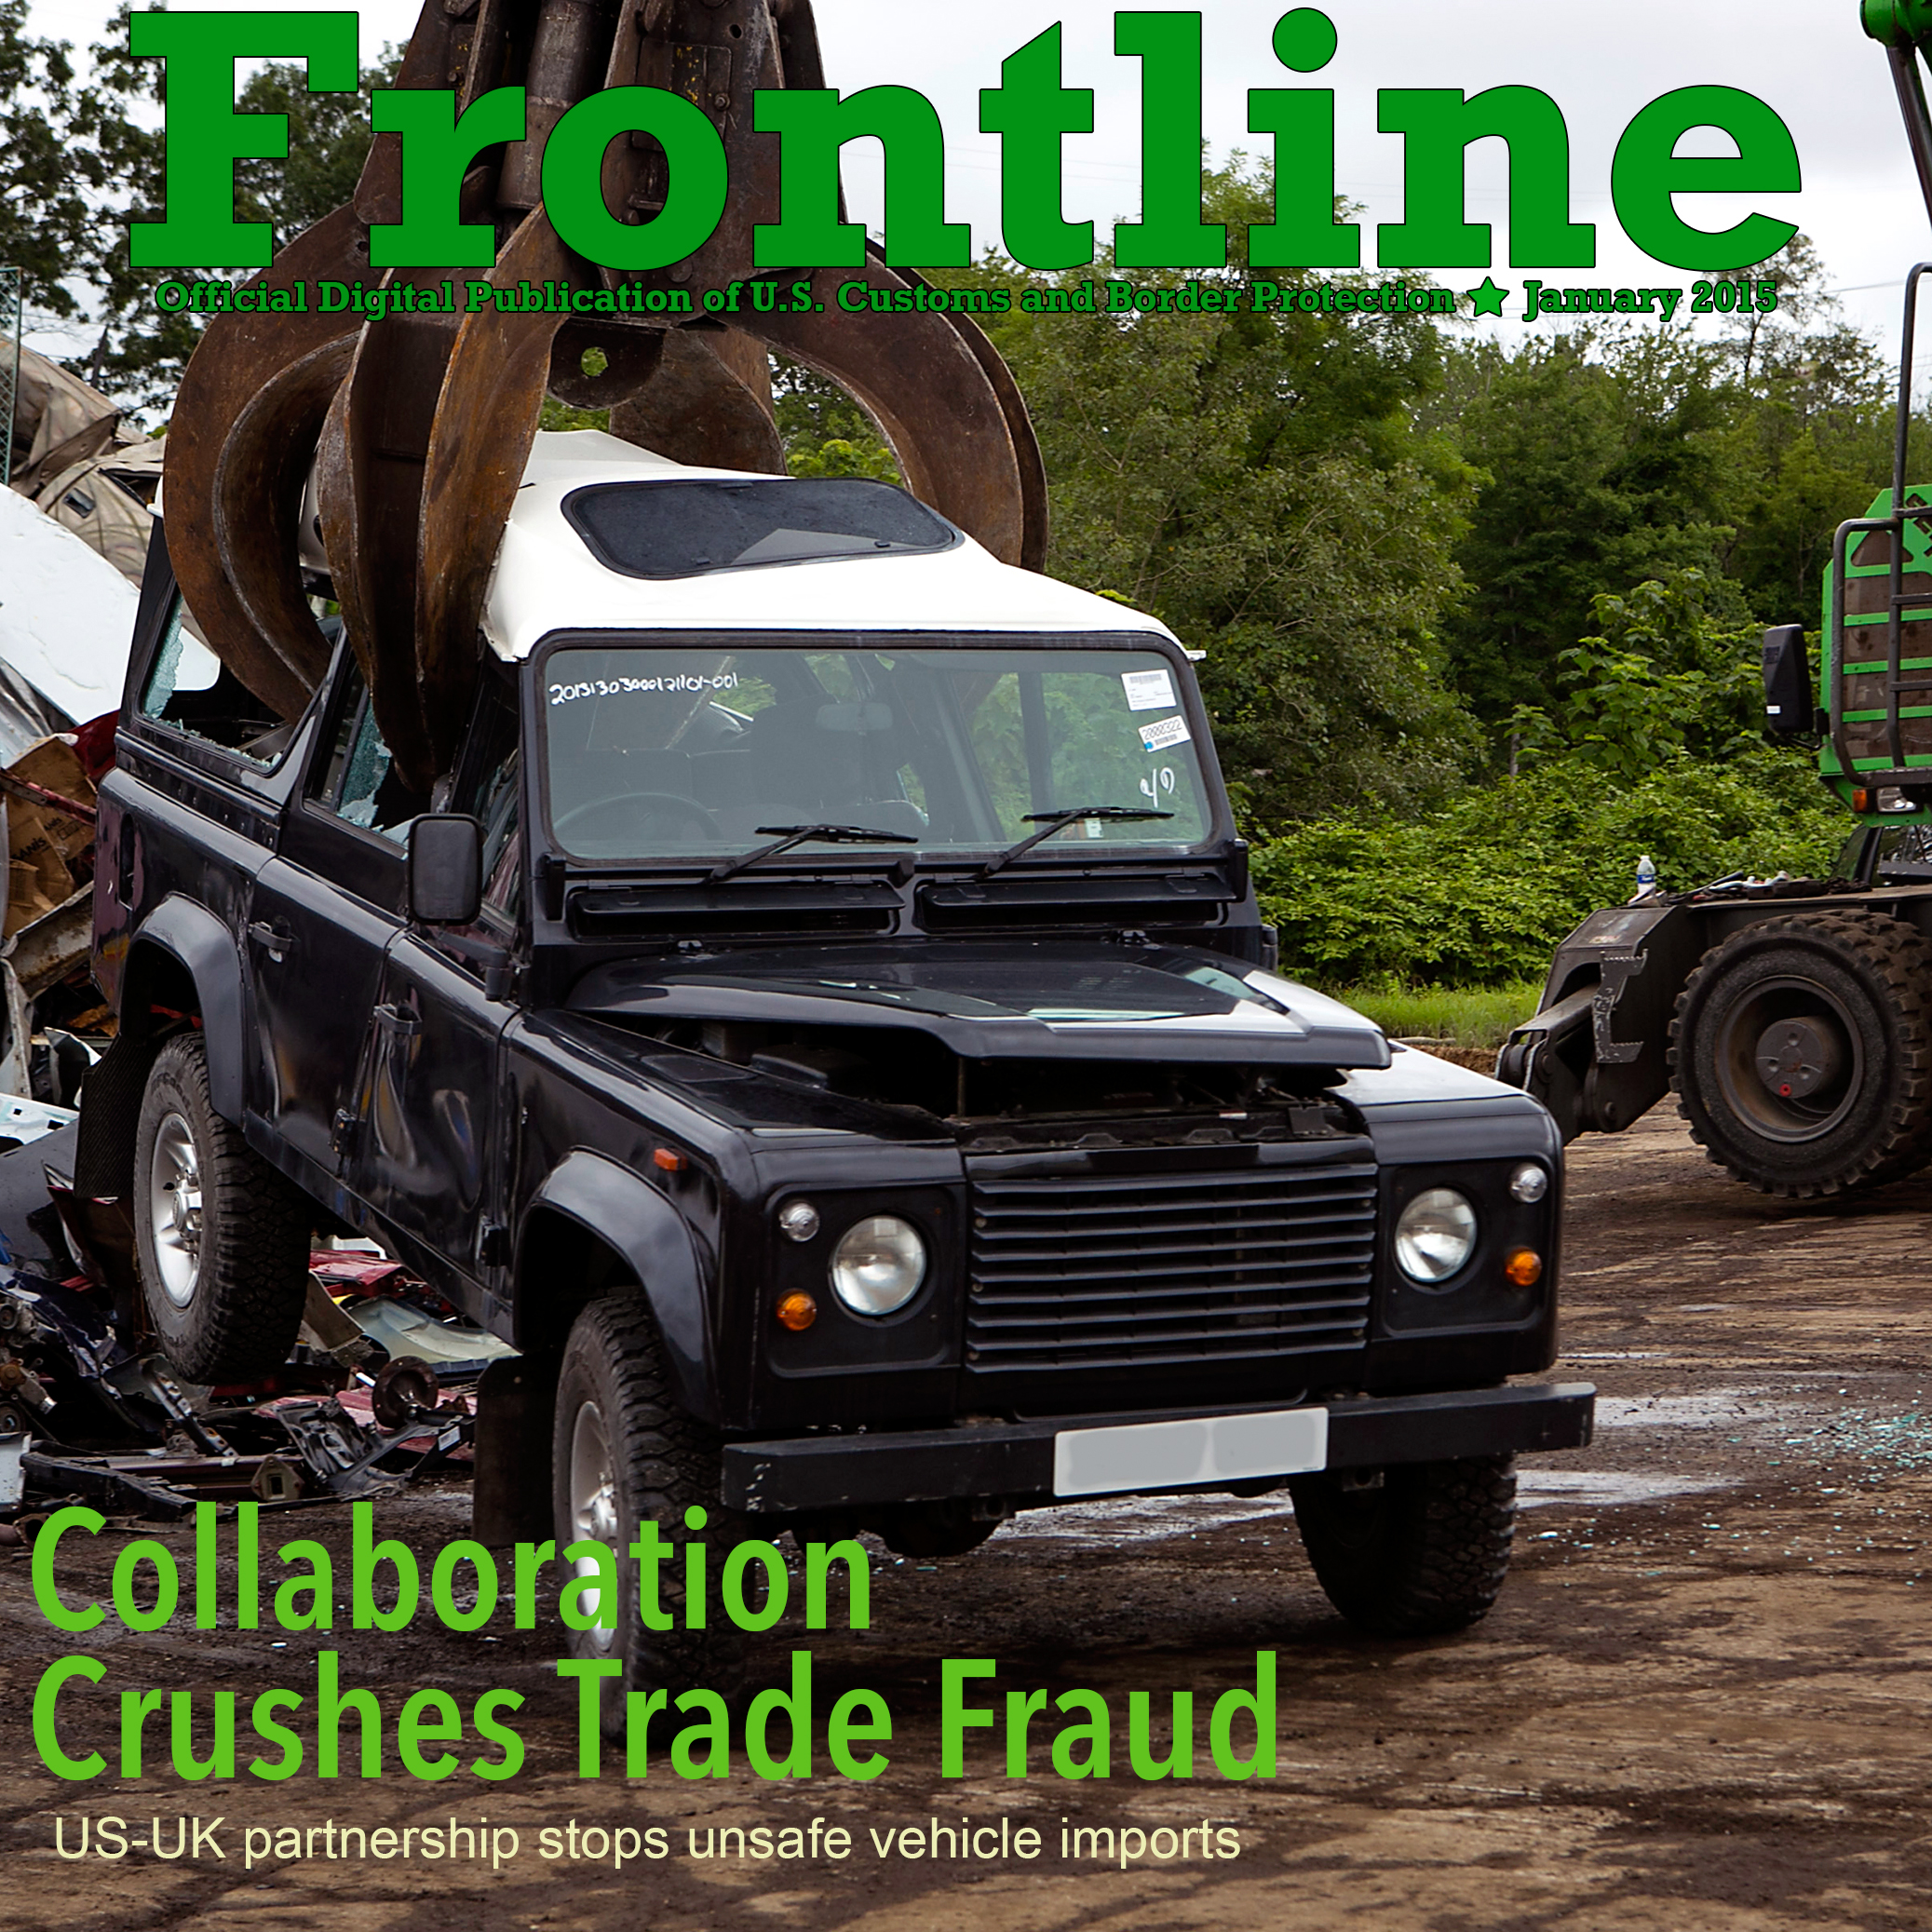 Magazine cover photo of Land Rover being crushed